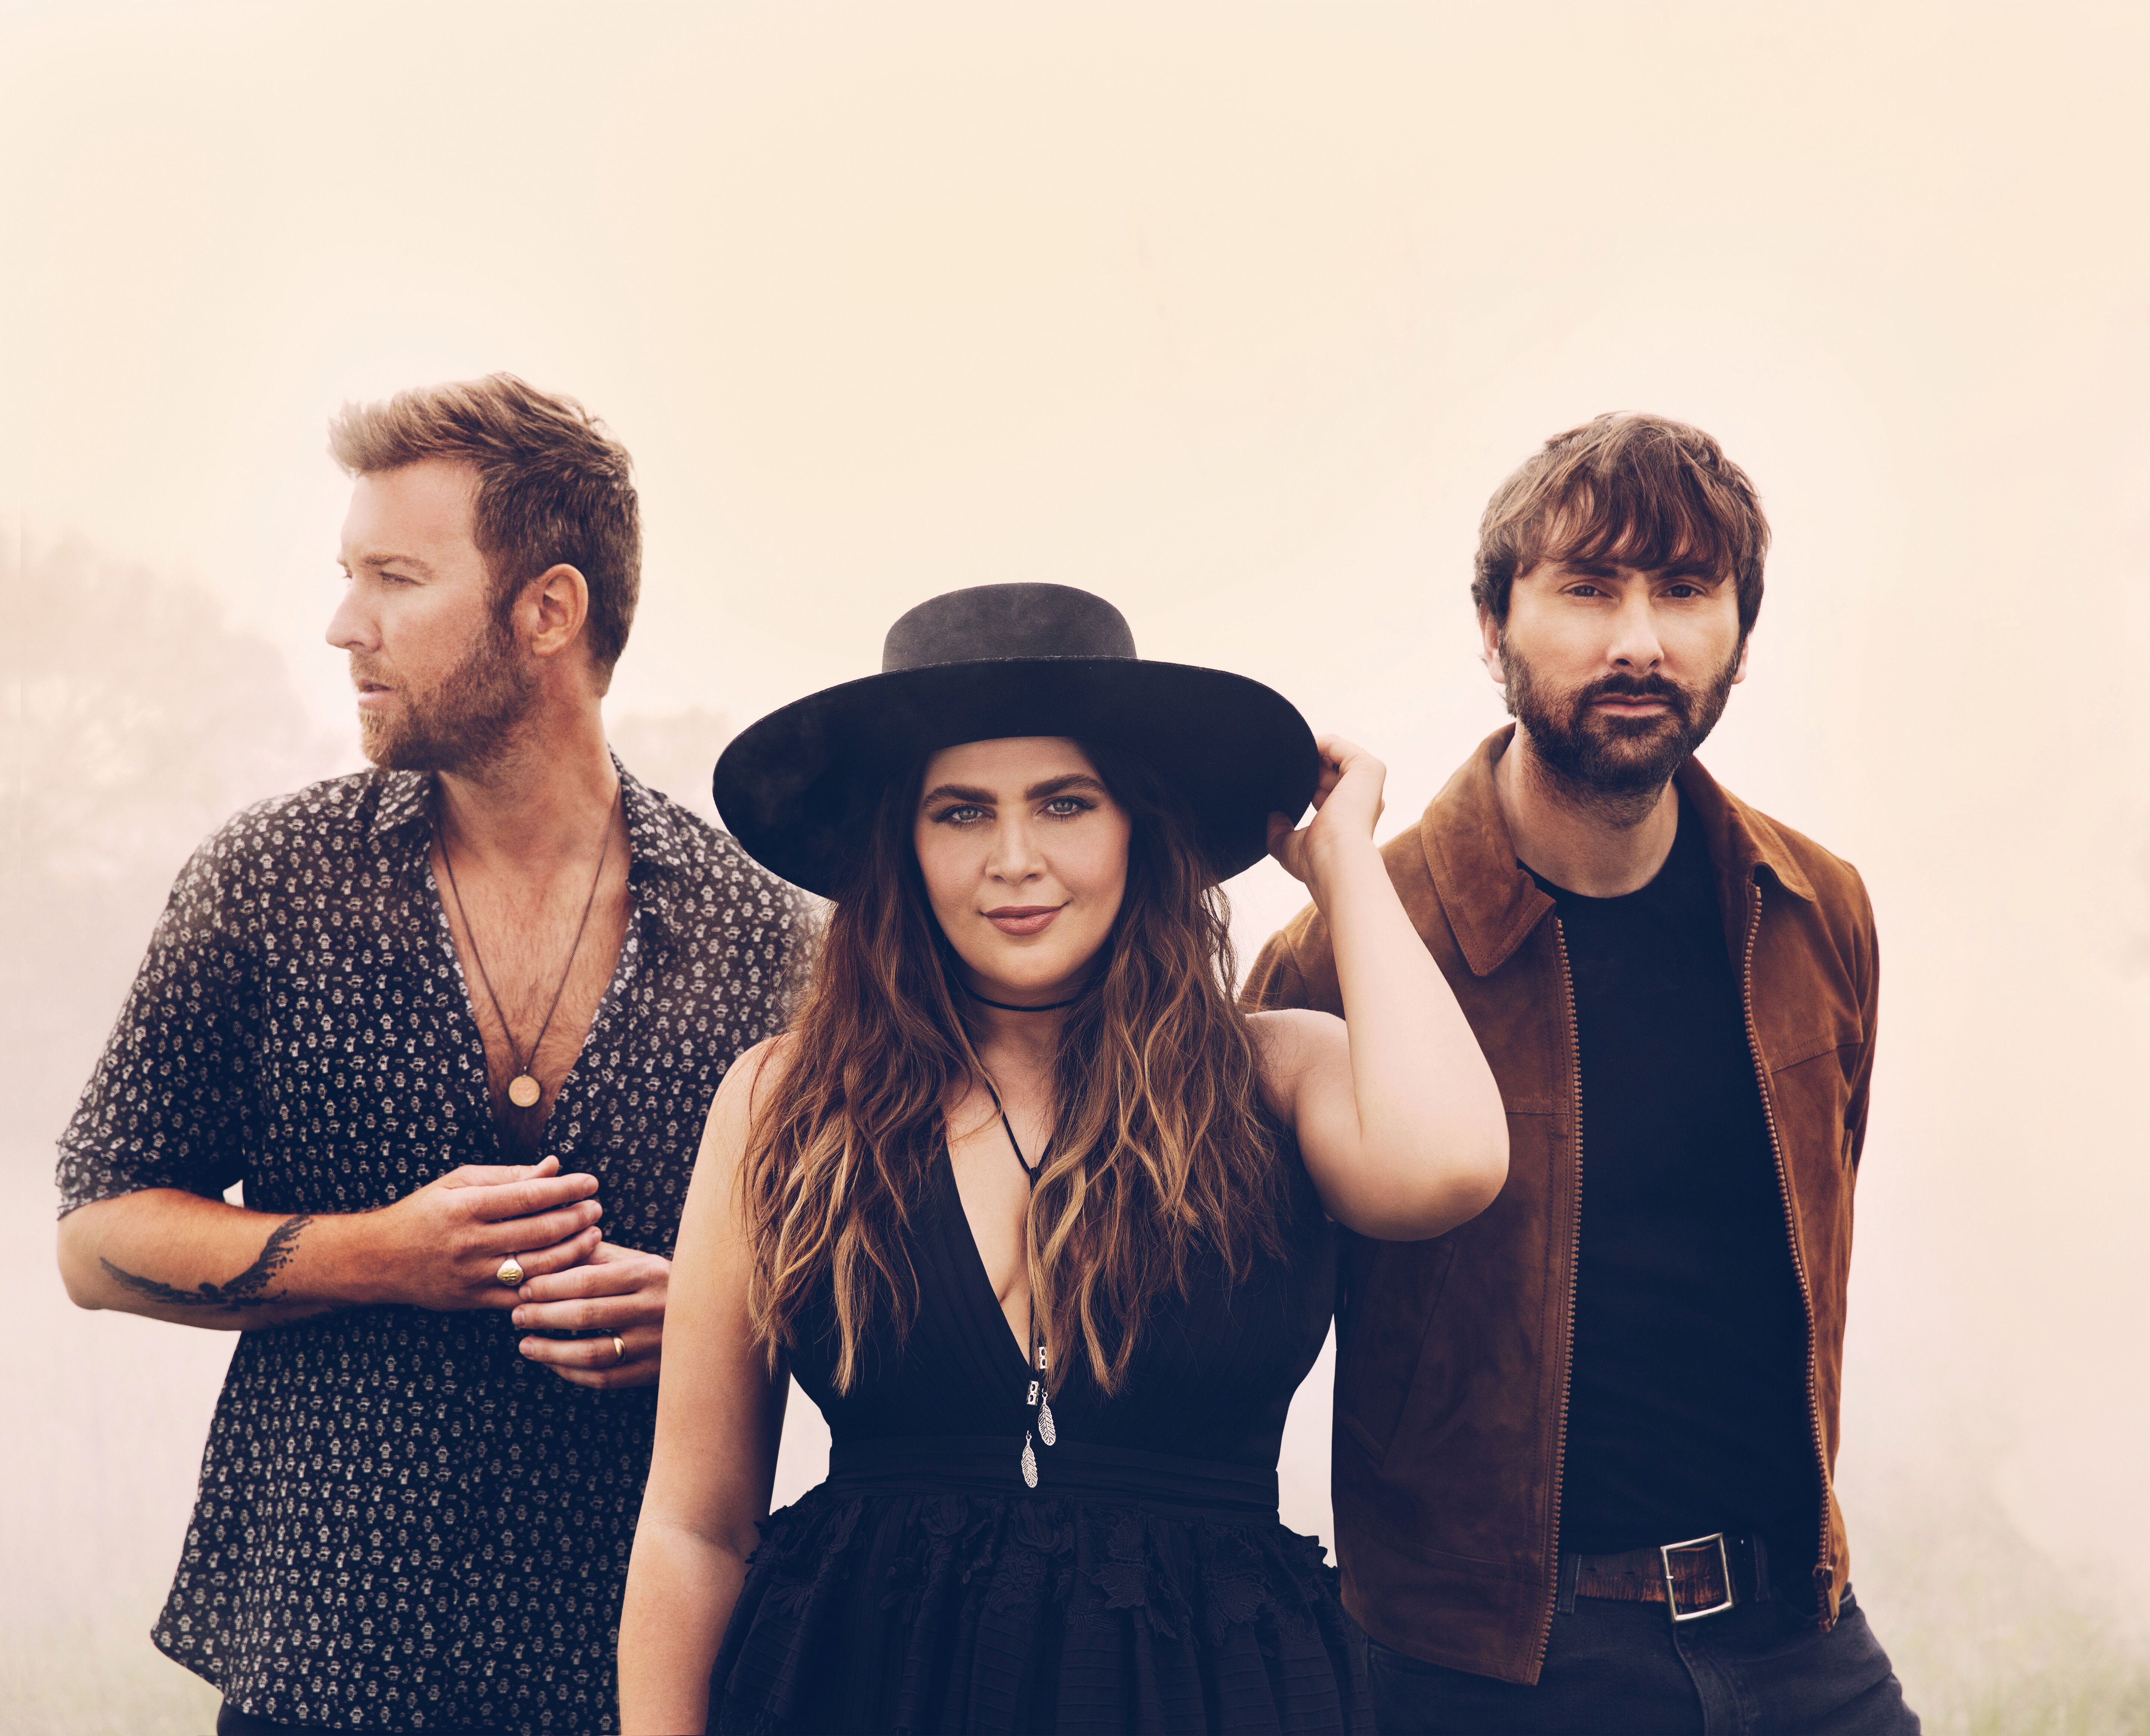 OMG: Lady Antebellum’s Hillary Scott Had to Leave the Room During the Recording of Emotional New Album ‘Ocean’